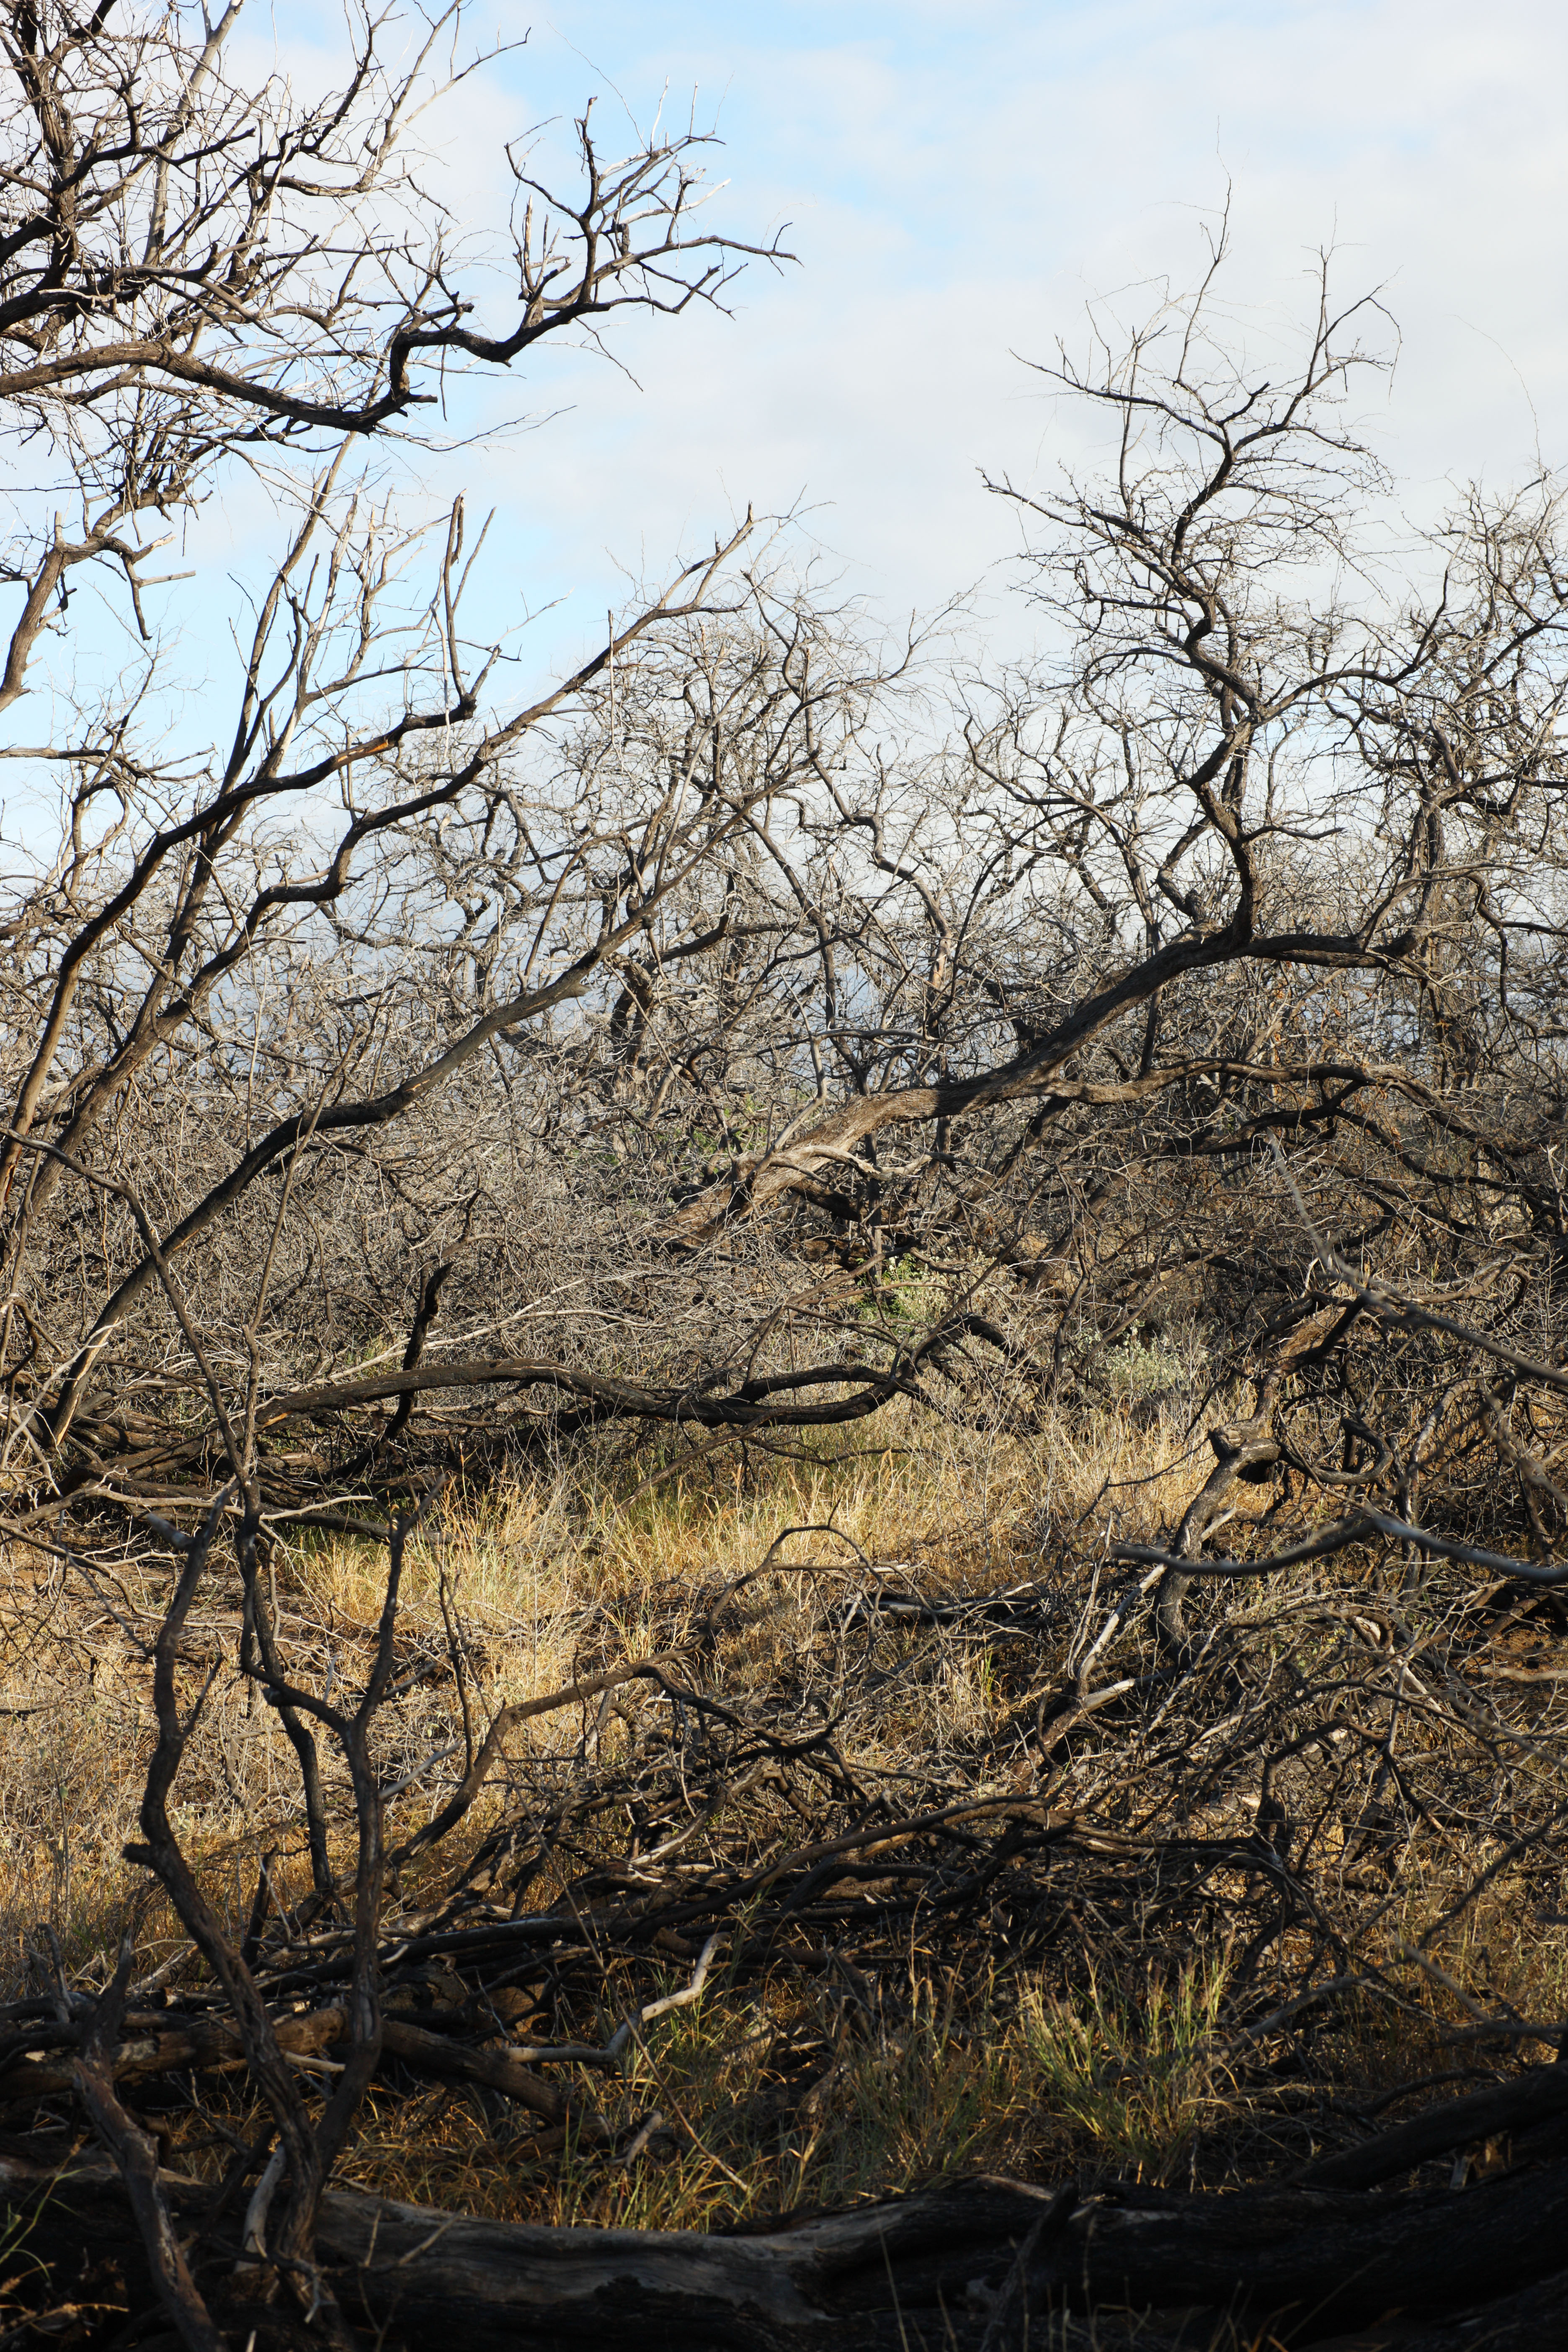 photo,material,free,landscape,picture,stock photo,Creative Commons,A dead tree of the lava, Lava, forest fire, branch, Drying